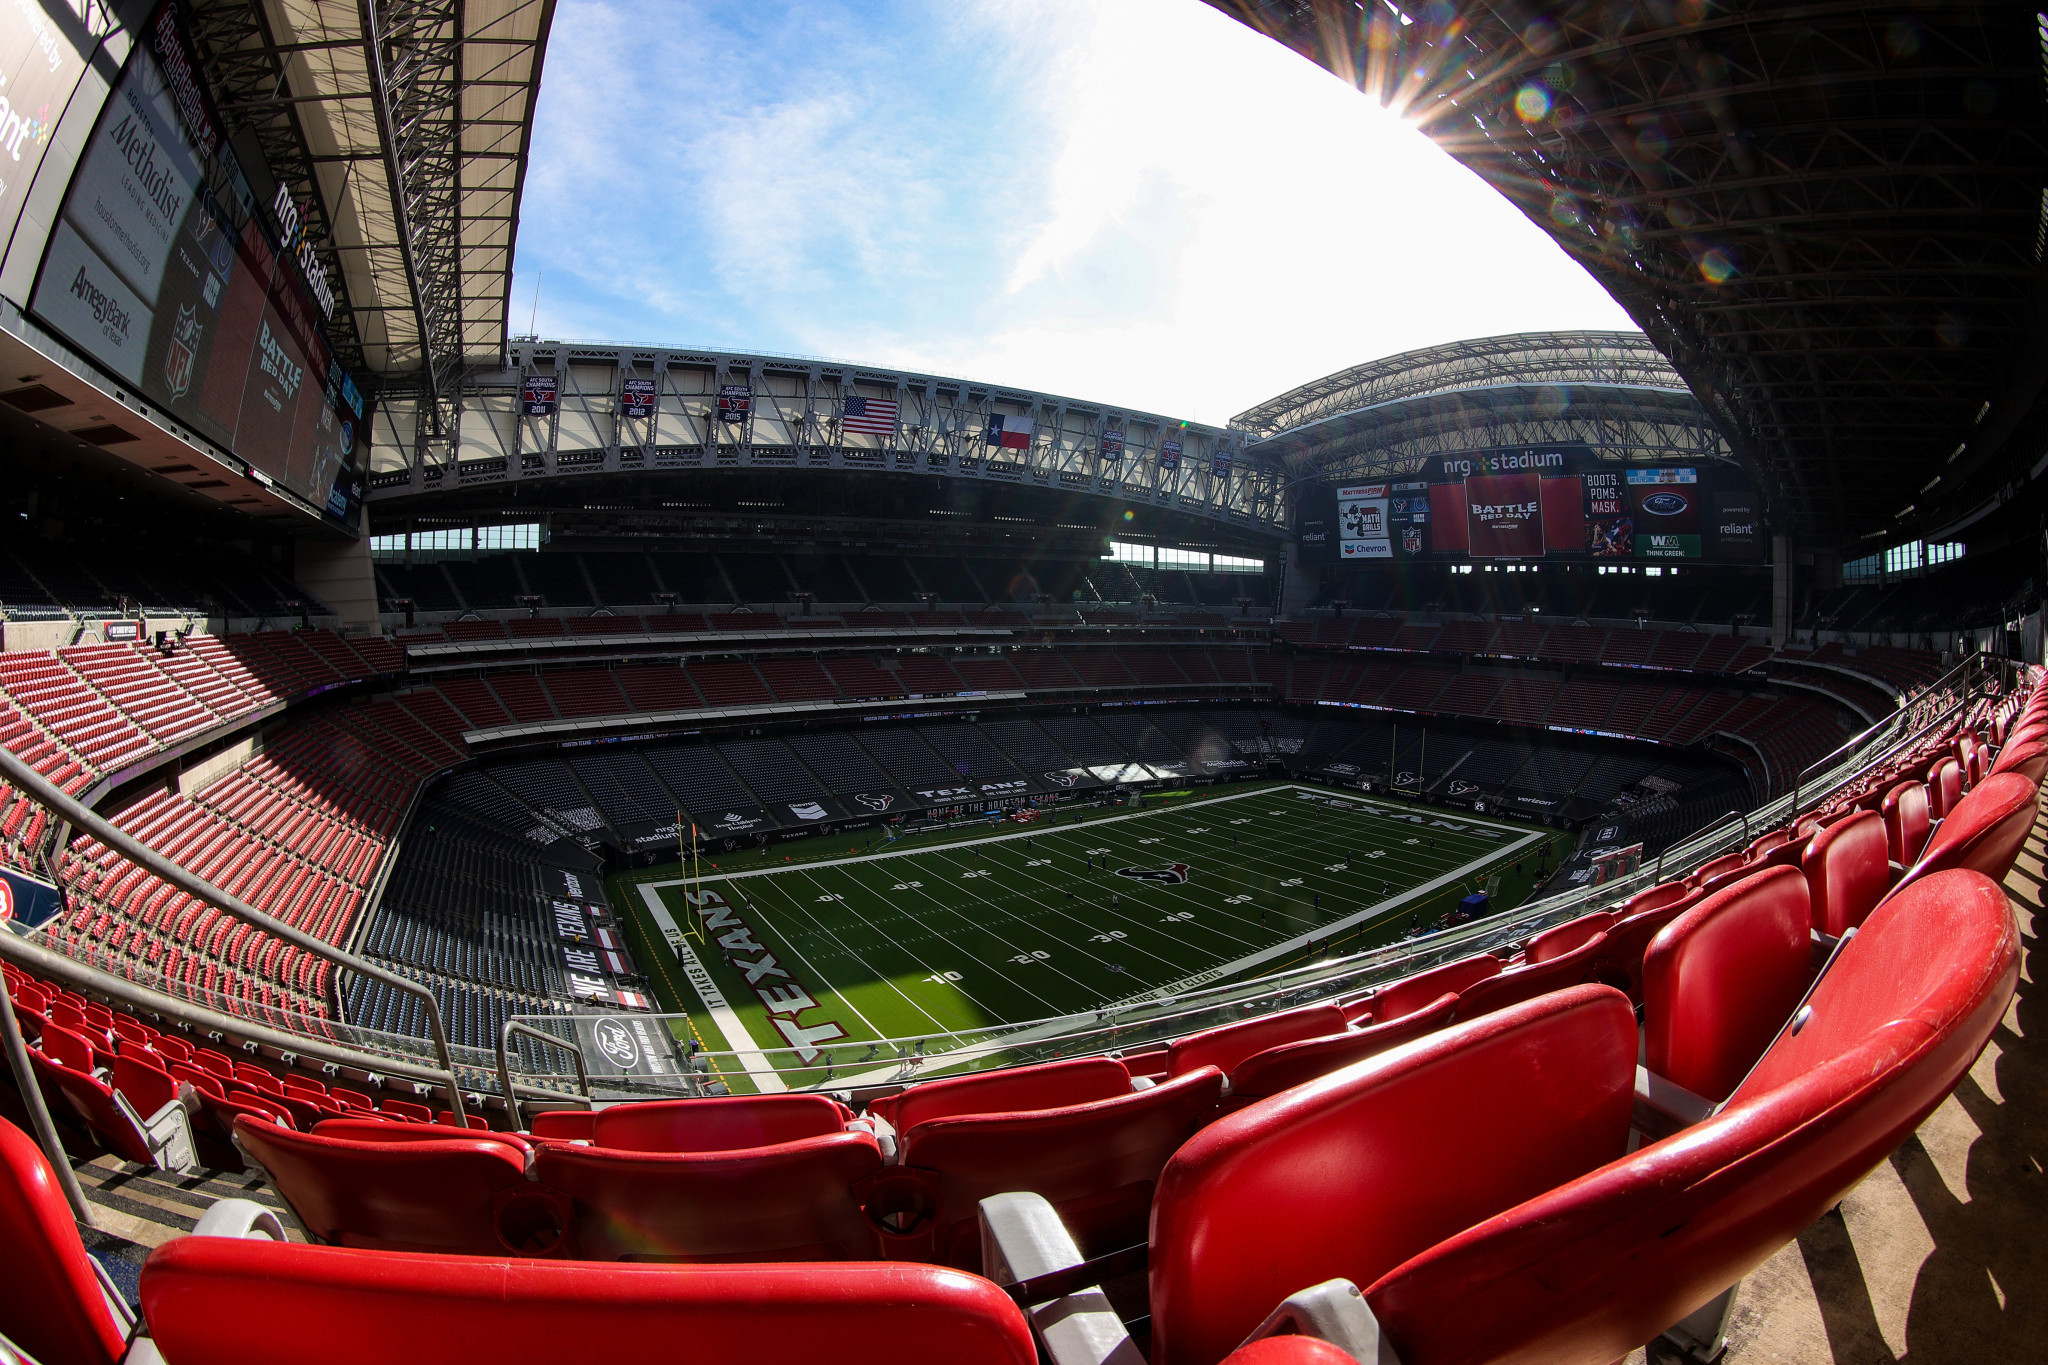 The NRG Stadium holds more than 70,000 spectators and is home to American football team the Houston Texans ©Getty Images